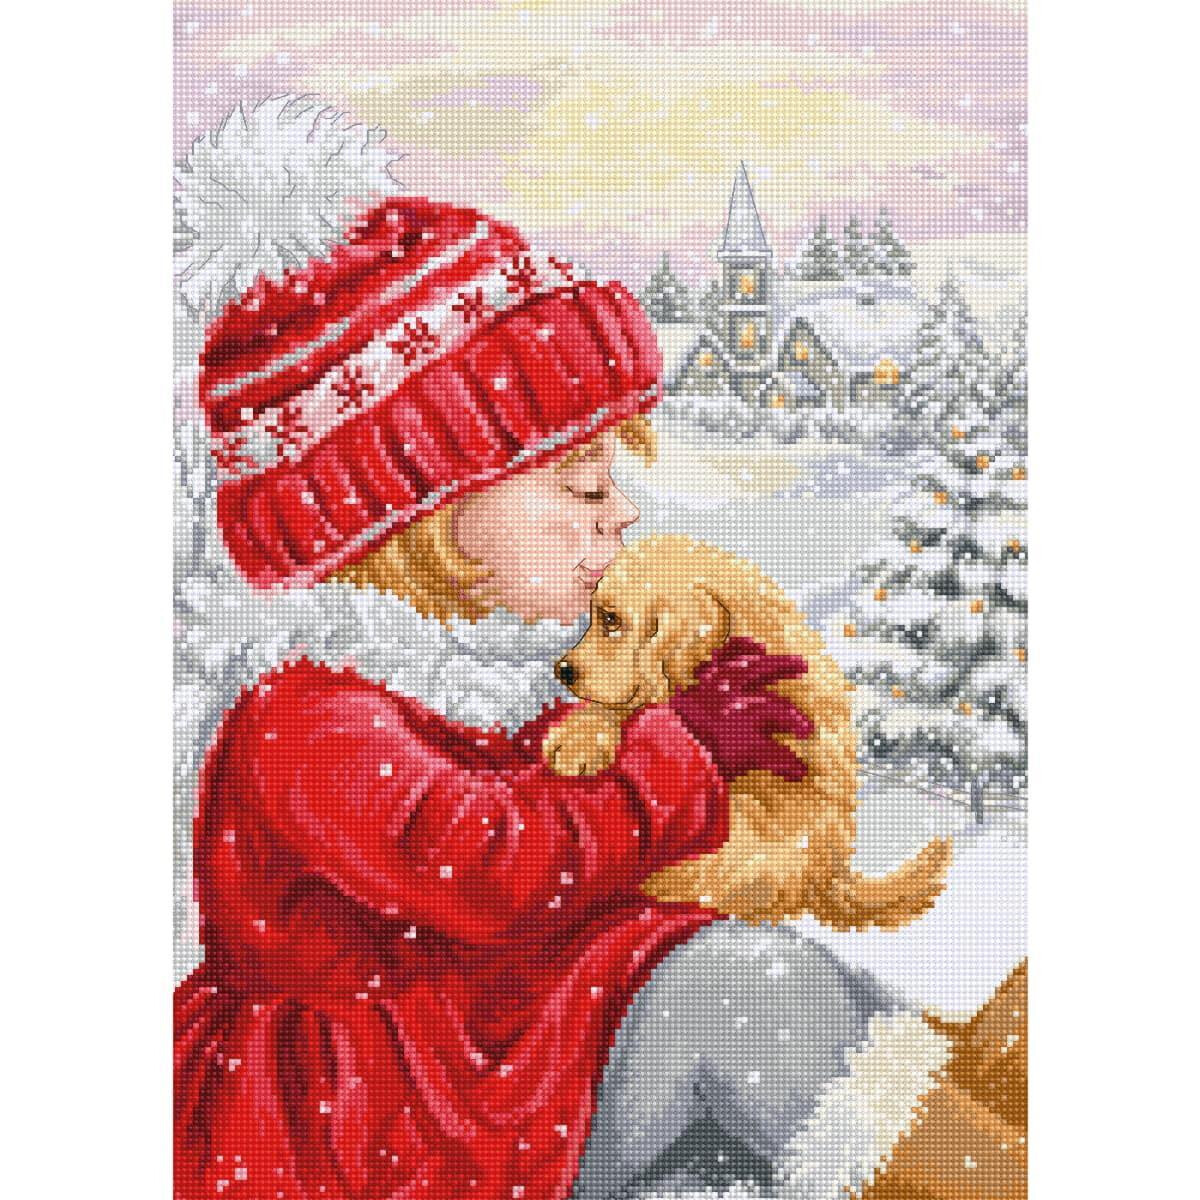 A young girl in a red coat and red and white bobble hat...